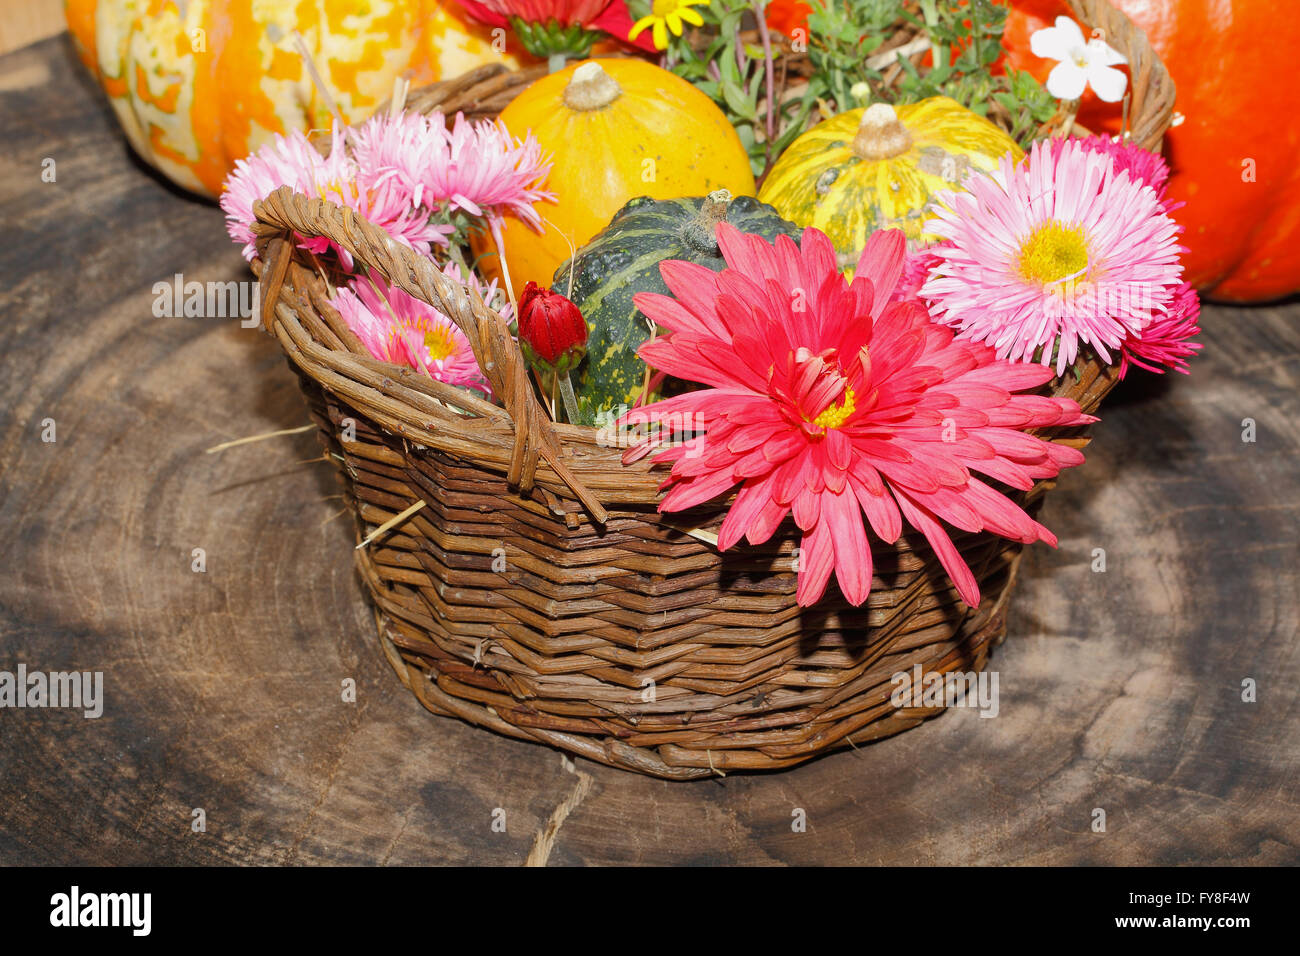 Flowers various garden flowers and ornamental gourds in a basket, table setting, place setting on a table Flowers, Thanksgiving Stock Photo